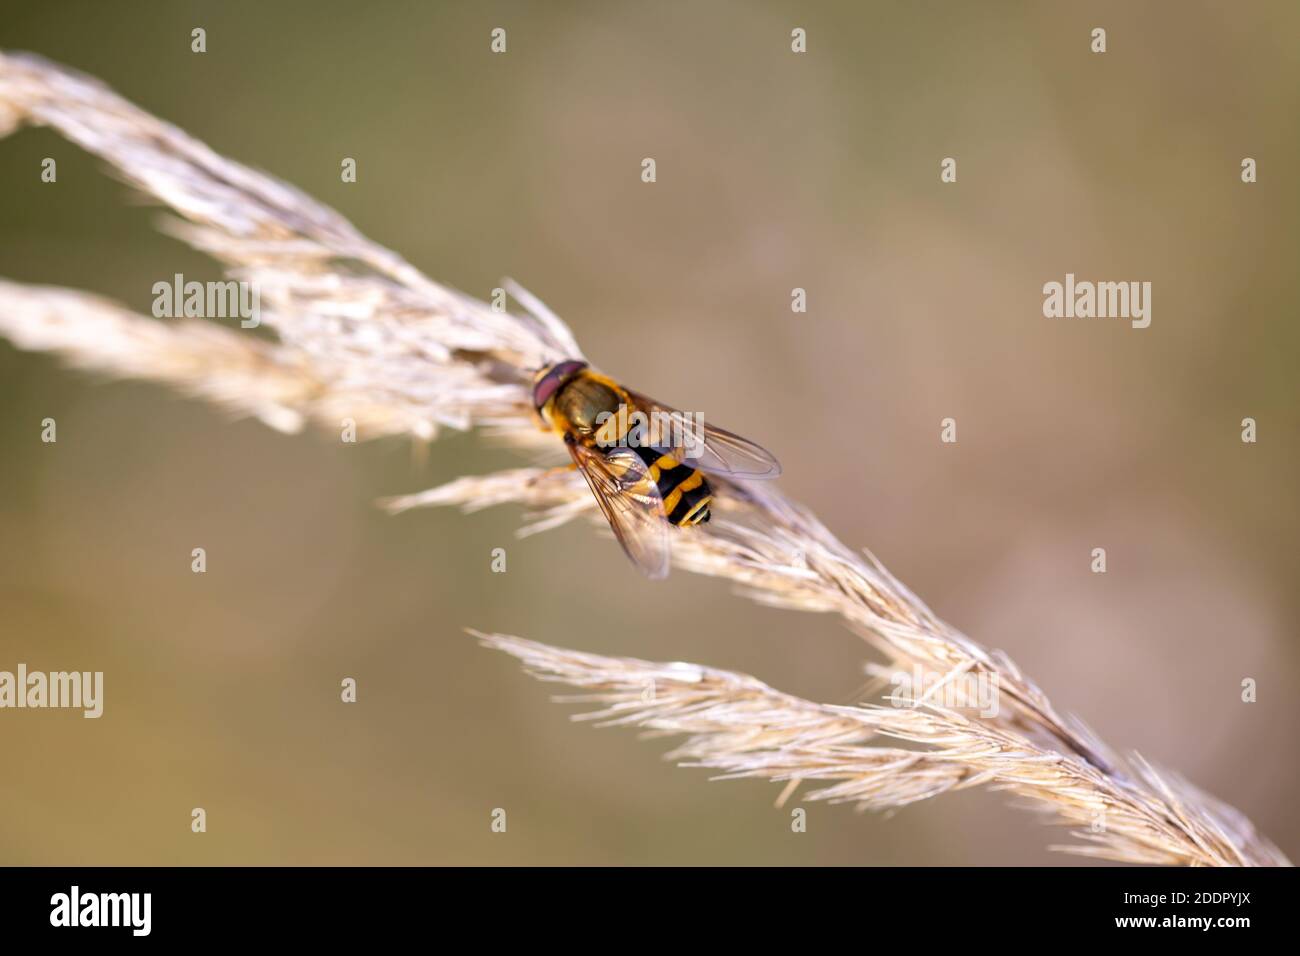 A close up hoverfly resting on pampass grass Stock Photo